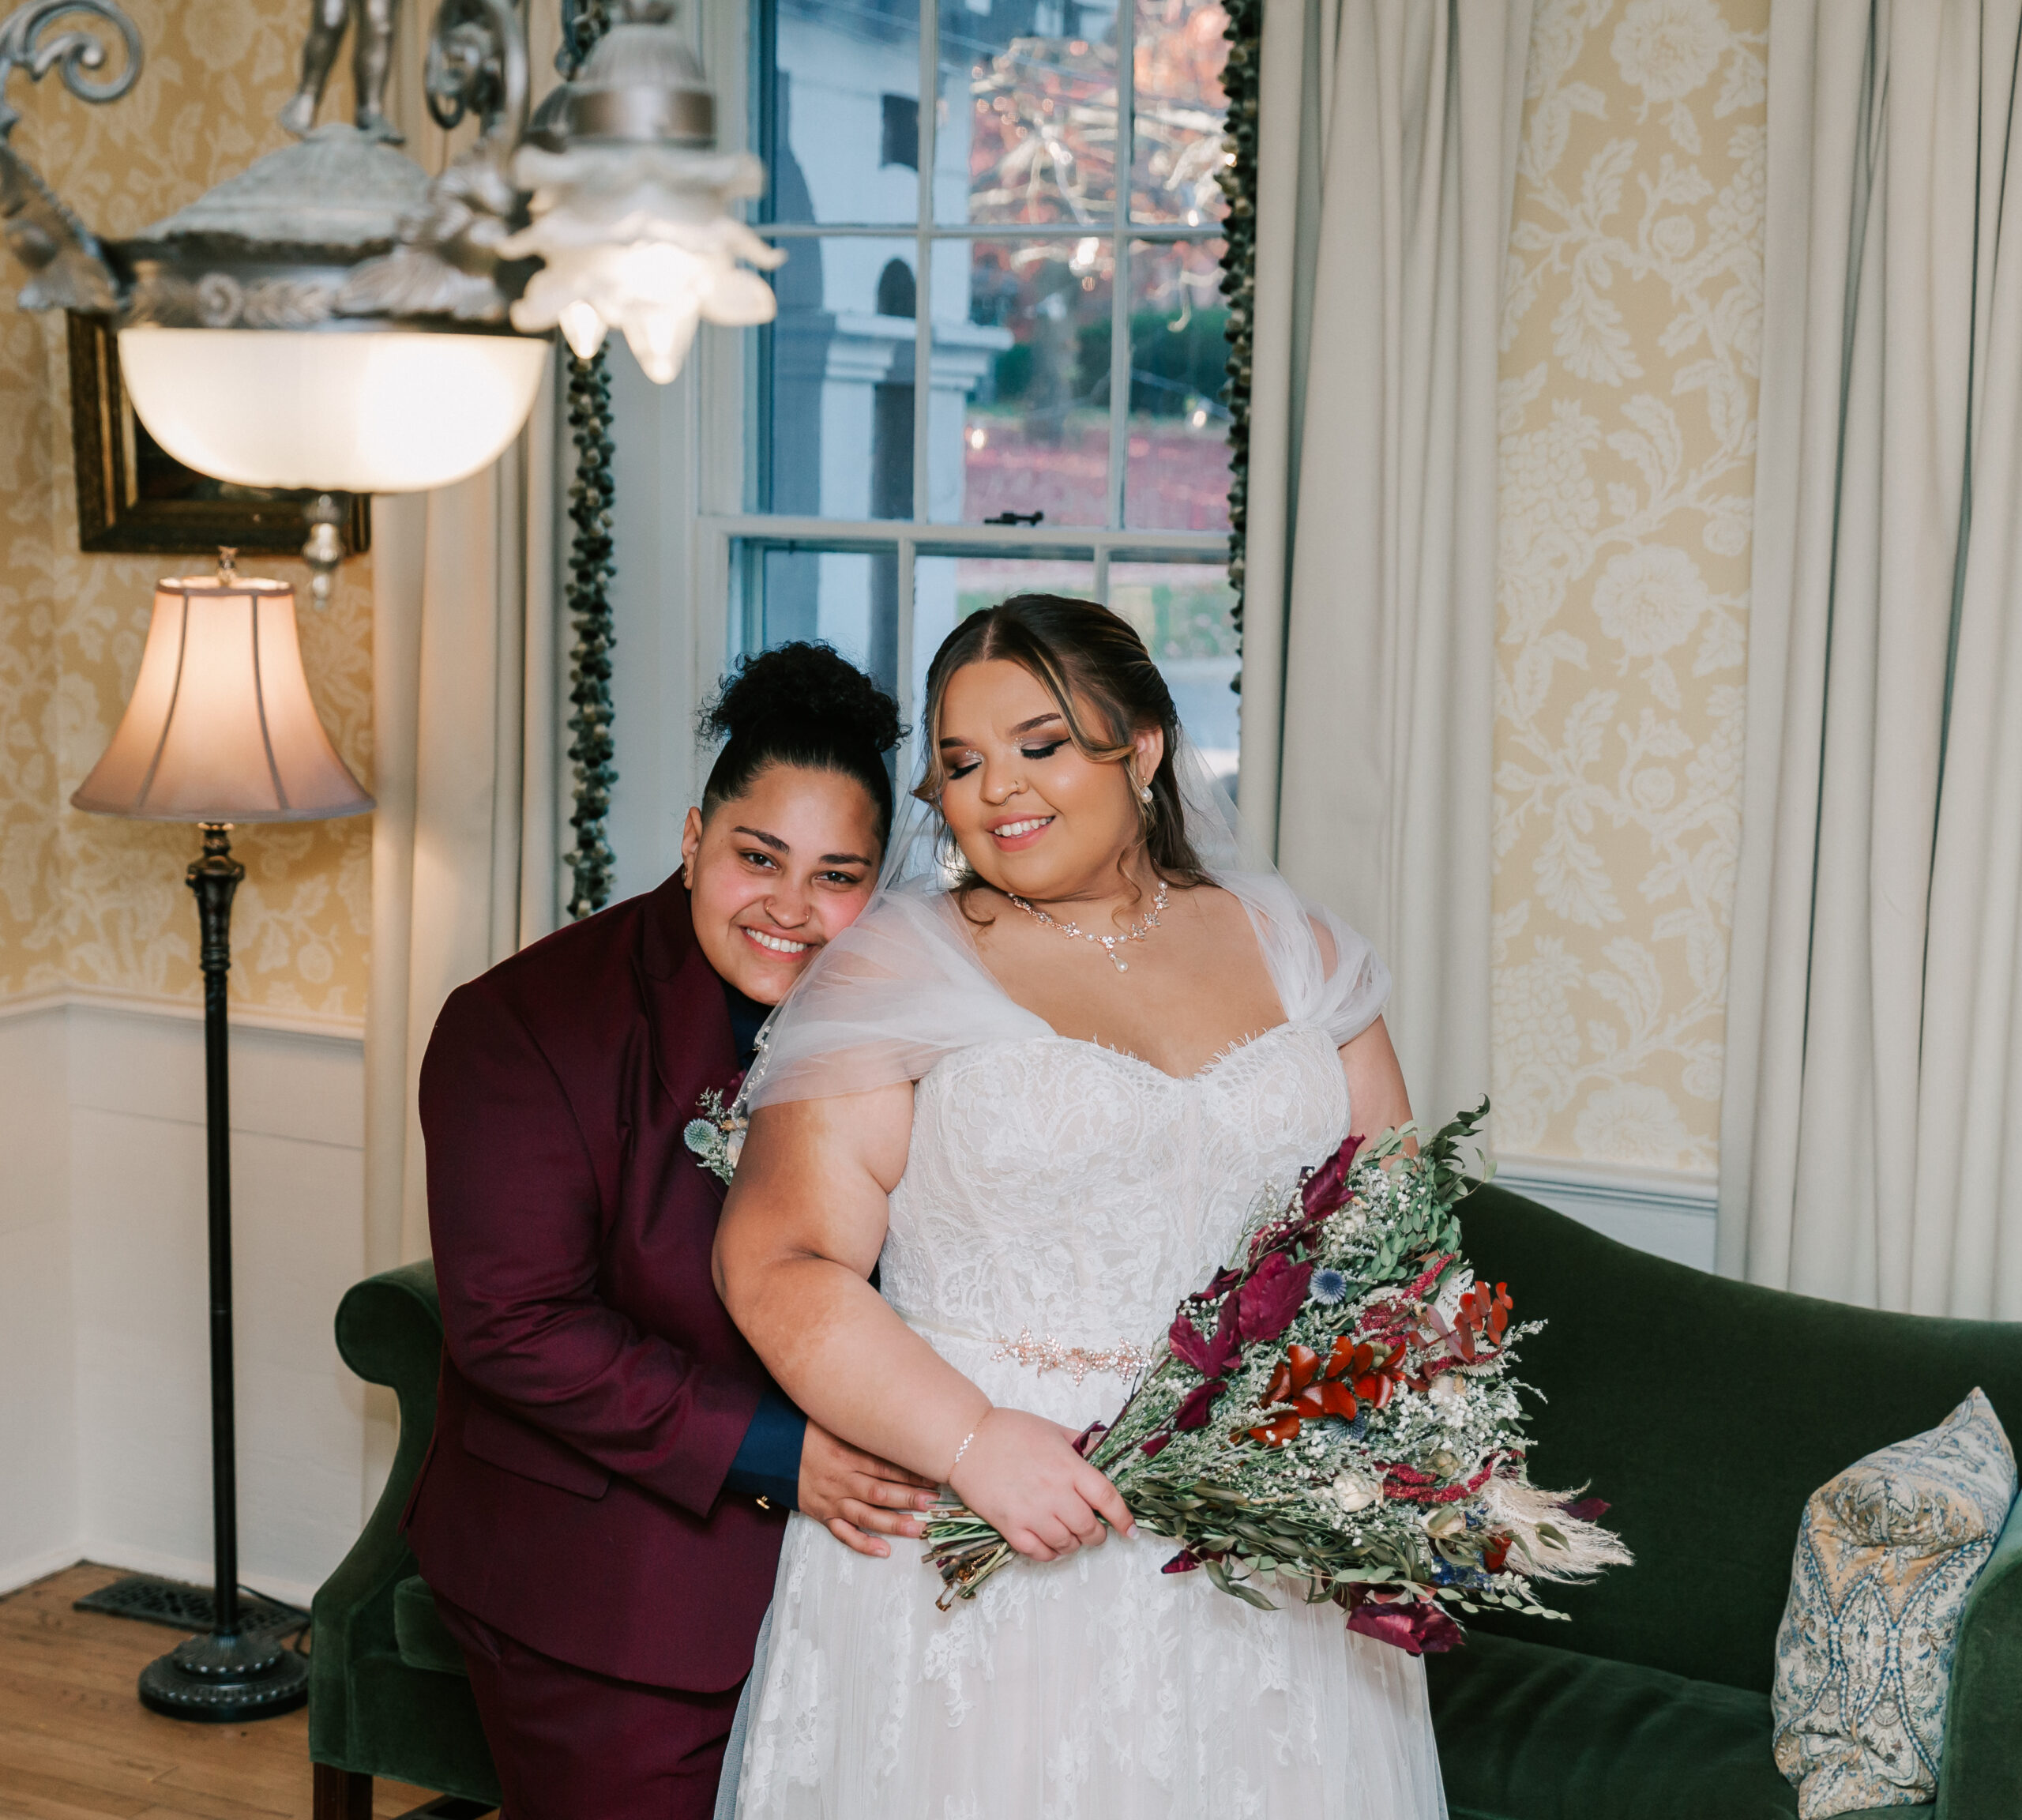 two brides celebrating their wedding at Concord's Colonial Inn, a beautiful historic wedding venue in Massachusetts